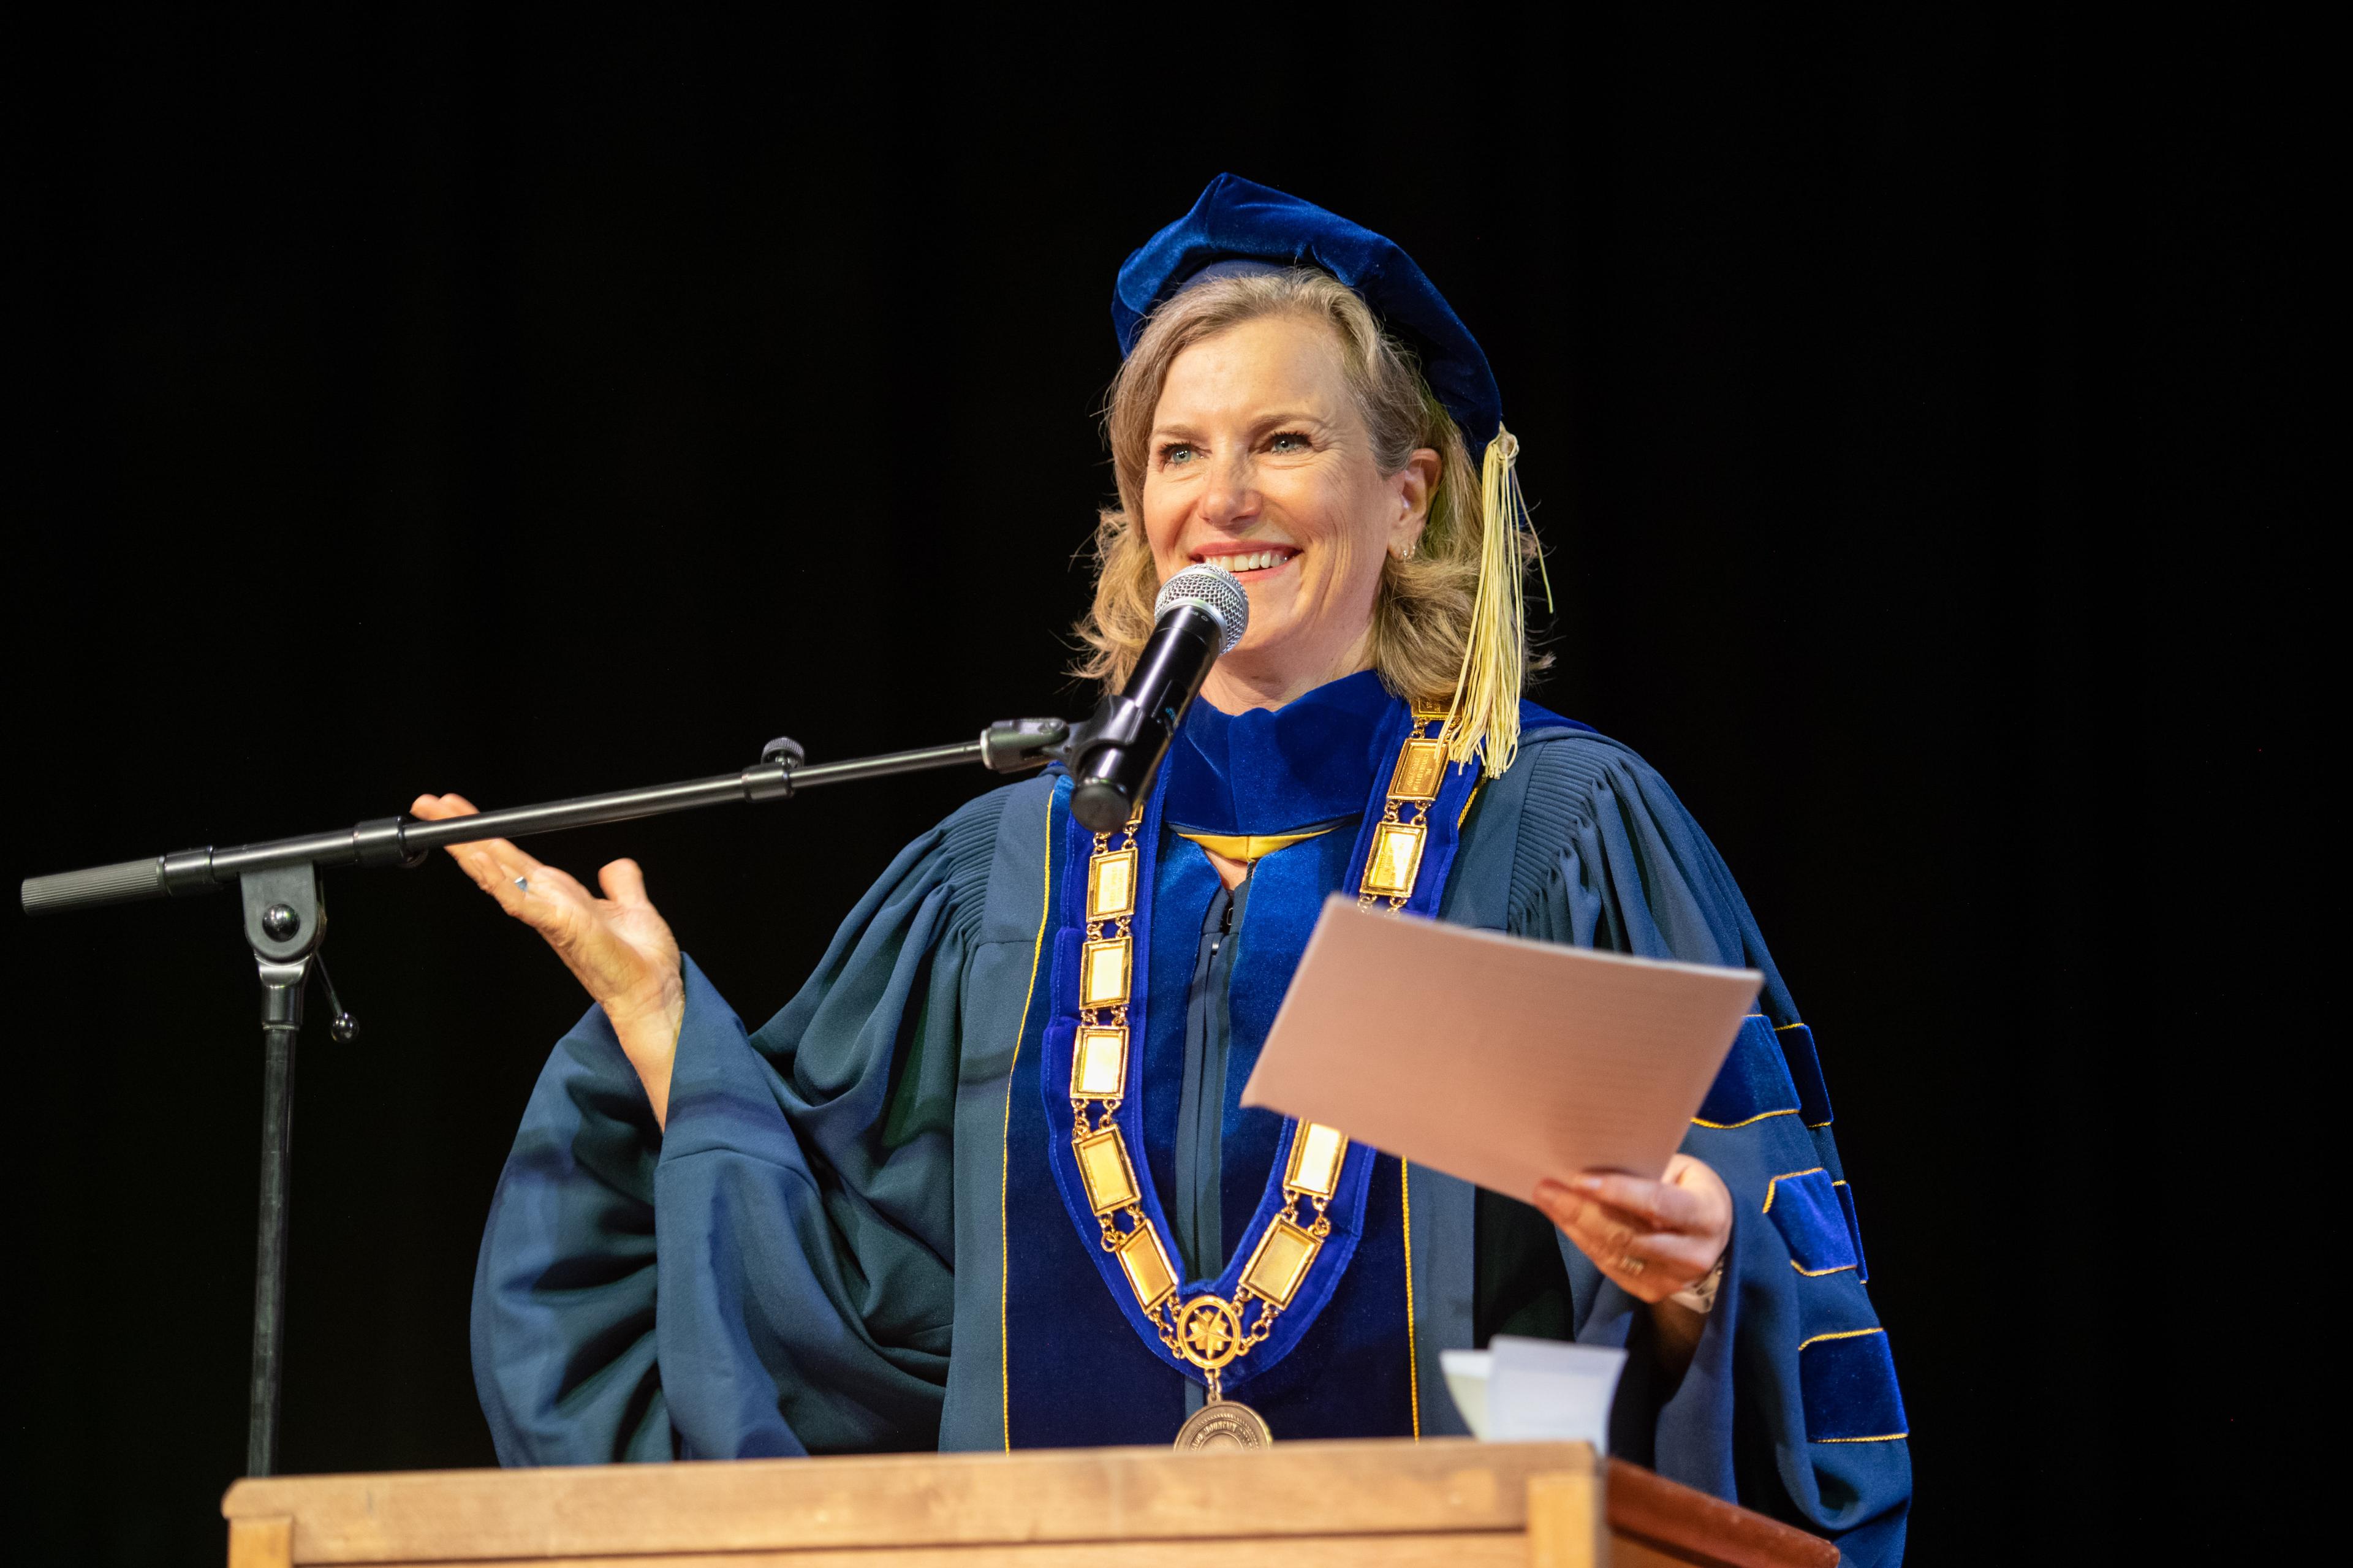 A female college president in blue robes smiles as she stands in front of a microphone.